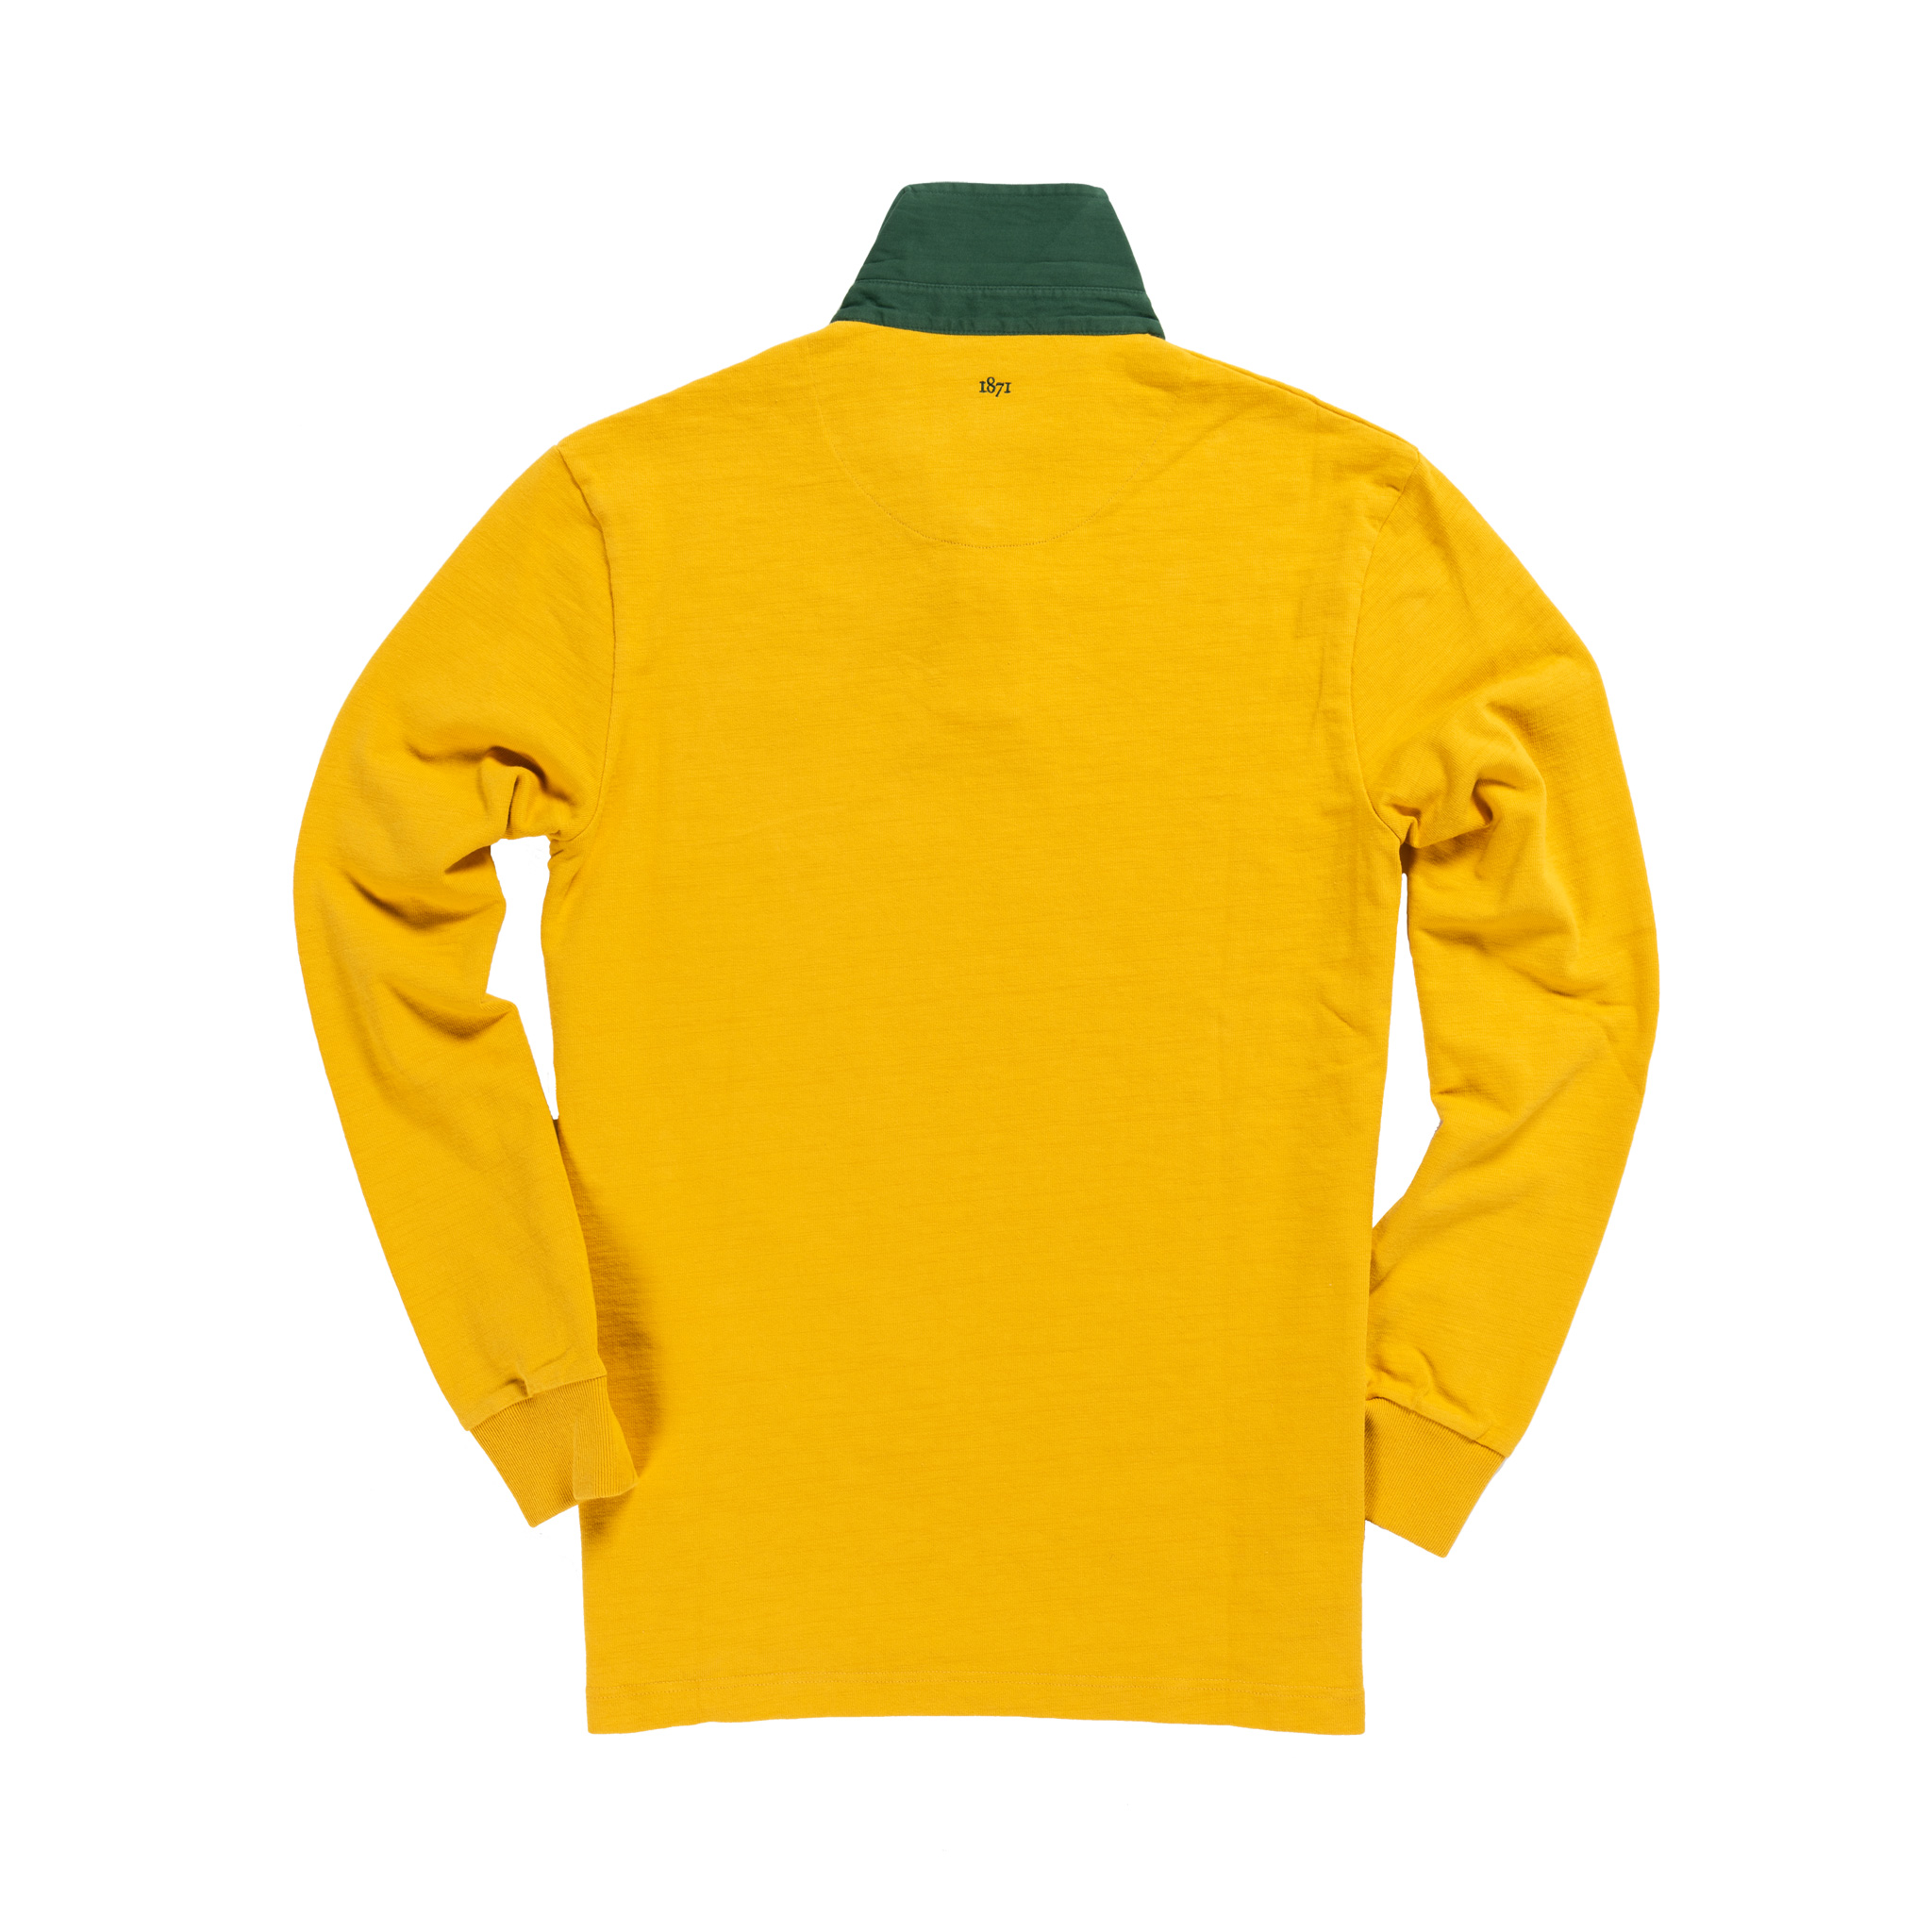 Classic Yellow with Green Collar 1871 Vintage Rugby Shirt